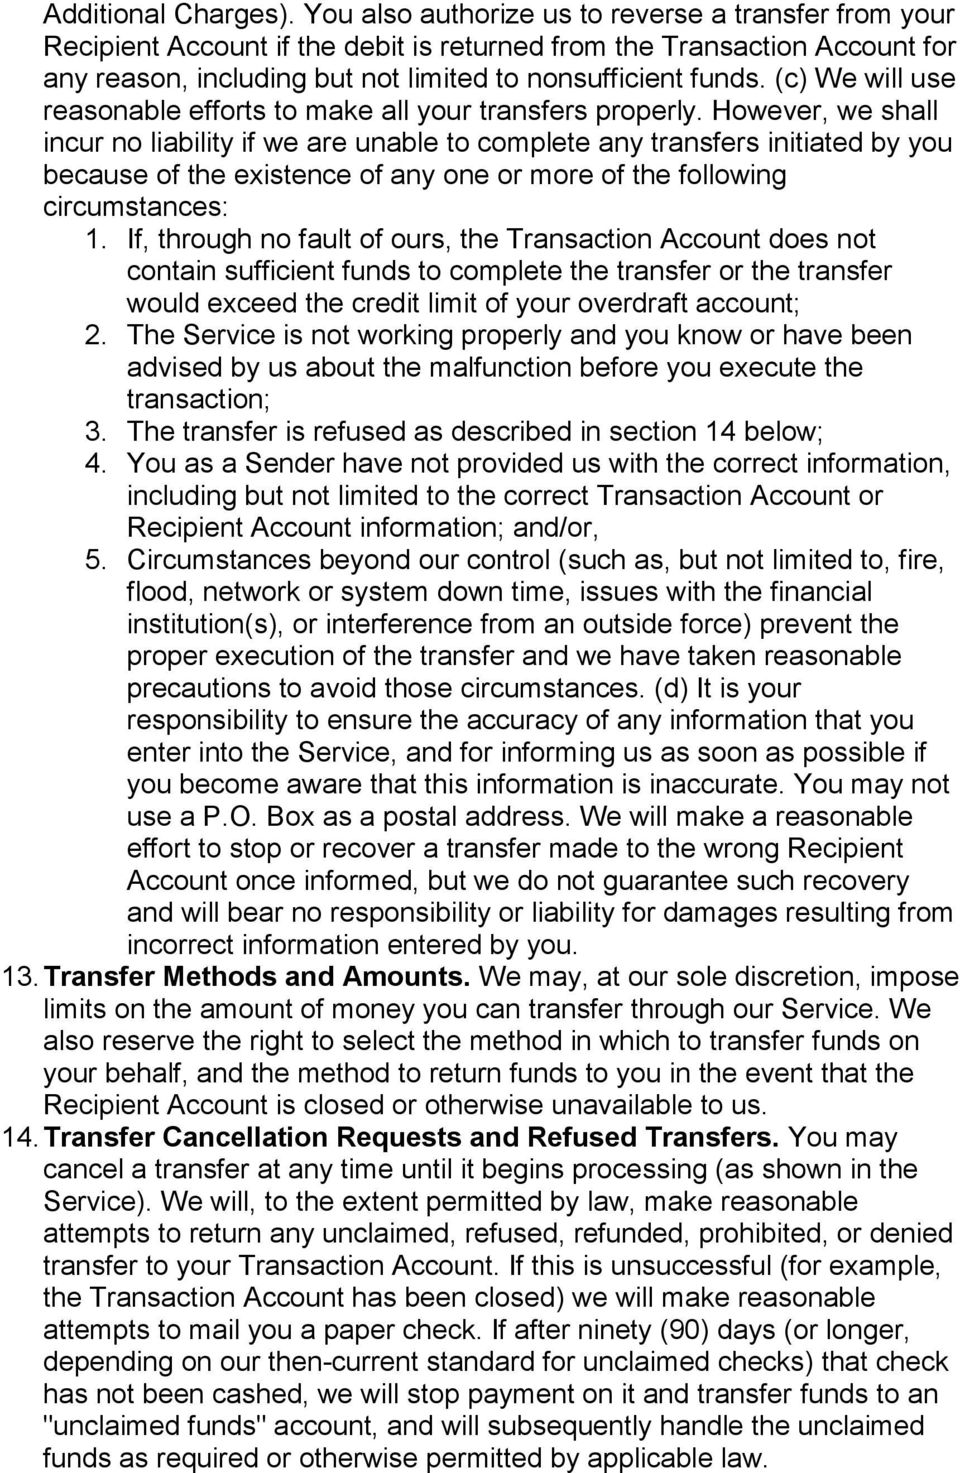 (c) We will use reasonable efforts to make all your transfers properly.